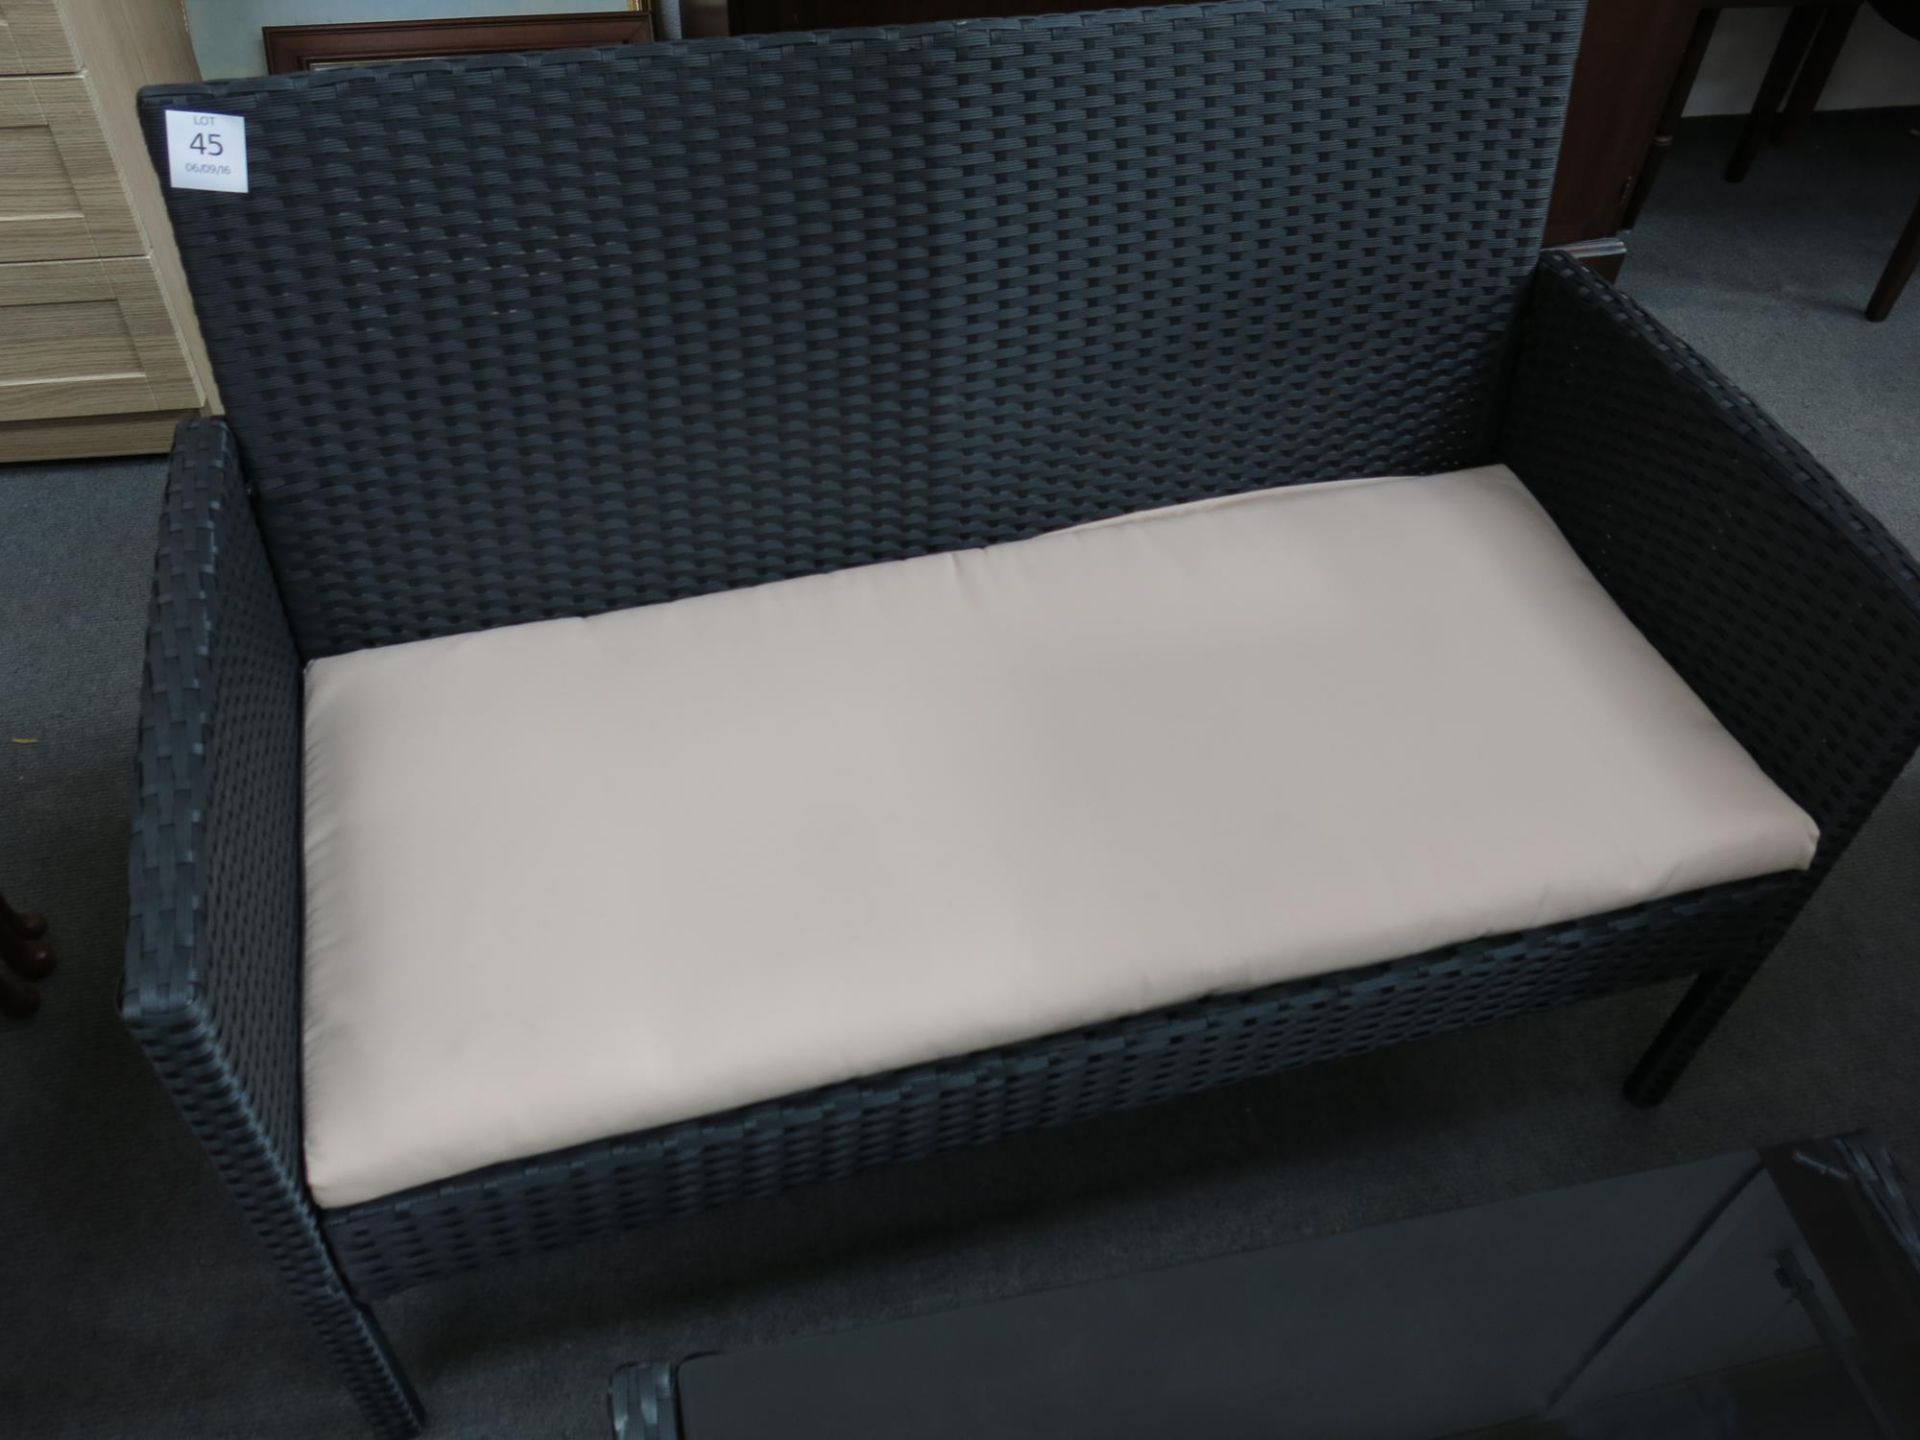 * A four piece set of all weather furniture to include; a two seat sofa, two single seat chairs